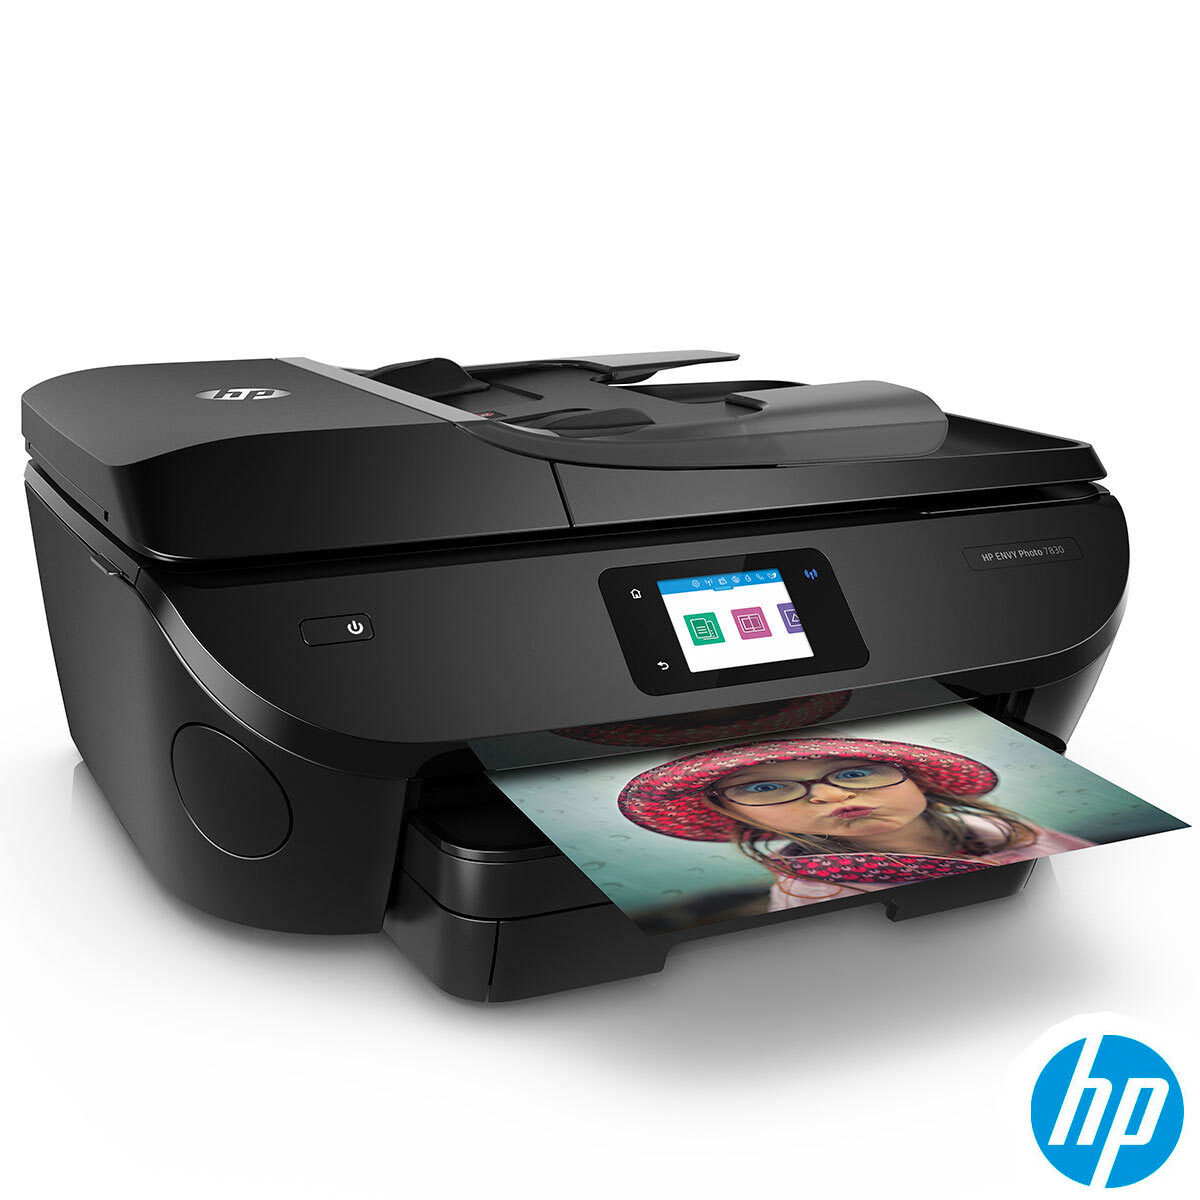 HP ENVY Photo 7830 All in One Wireless Printer